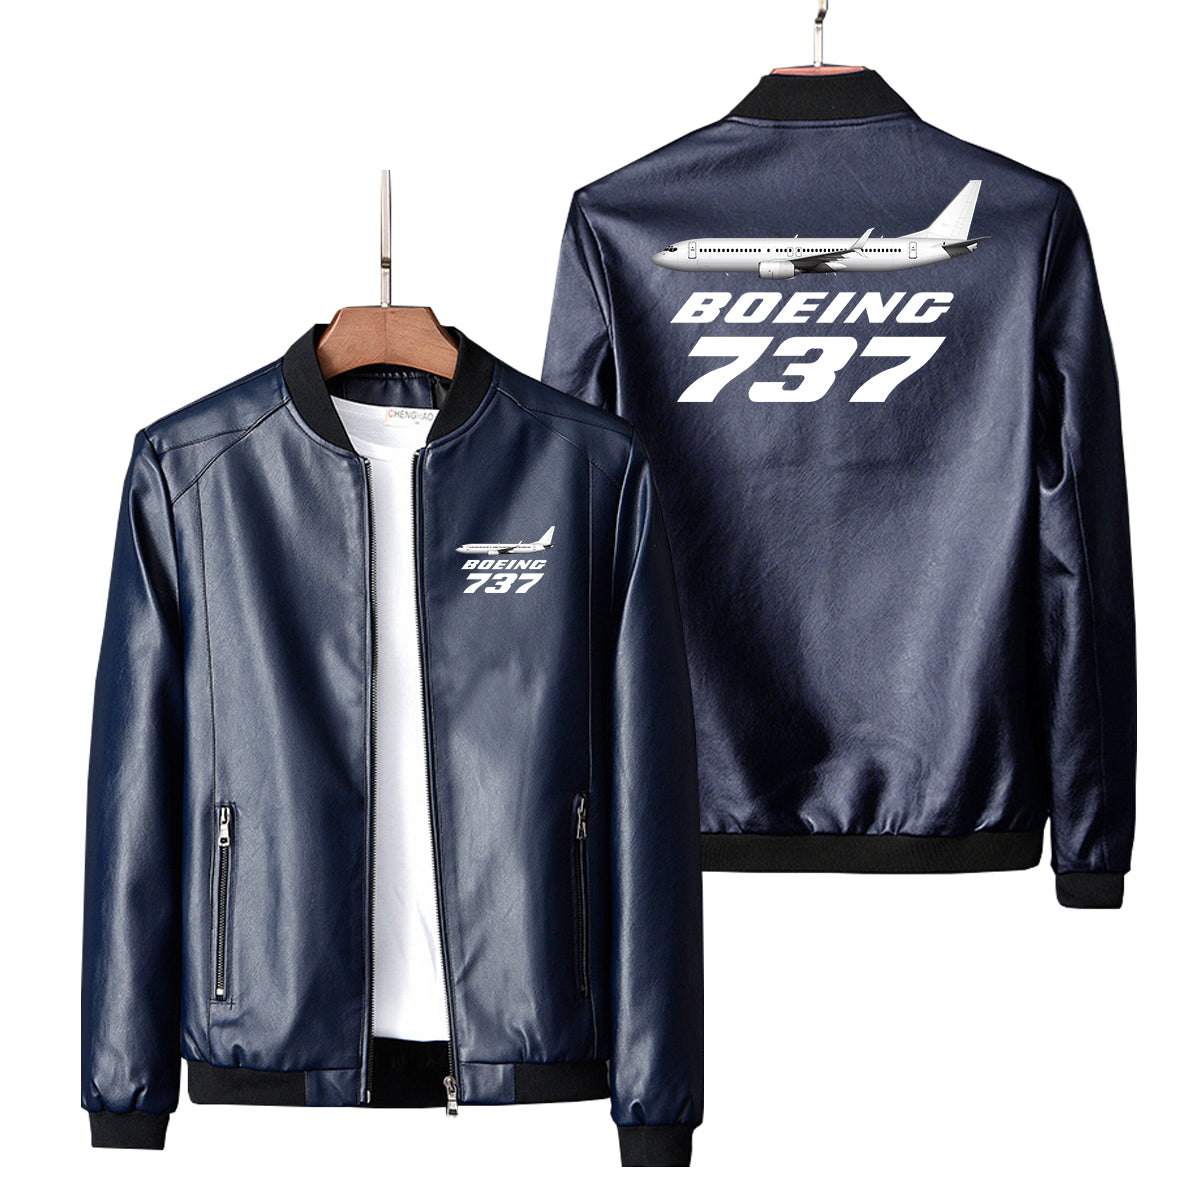 The Boeing 737 Designed PU Leather Jackets